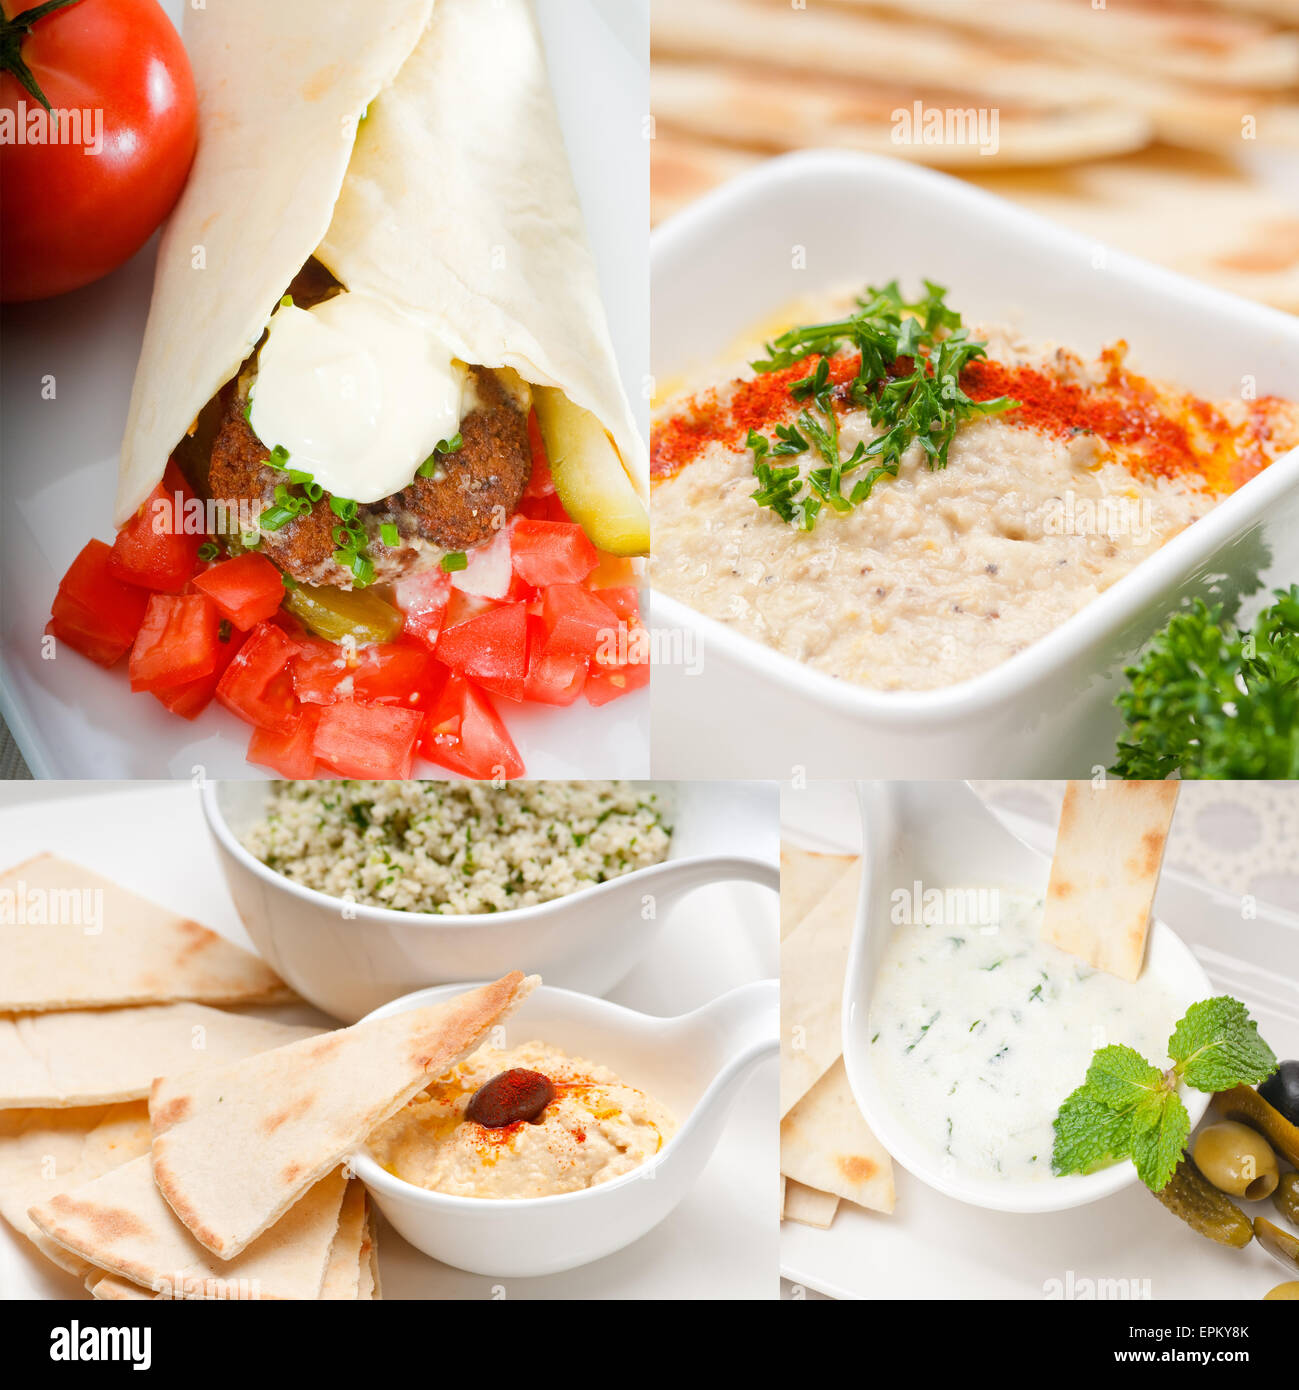 Arab middle east food collection Stock Photo